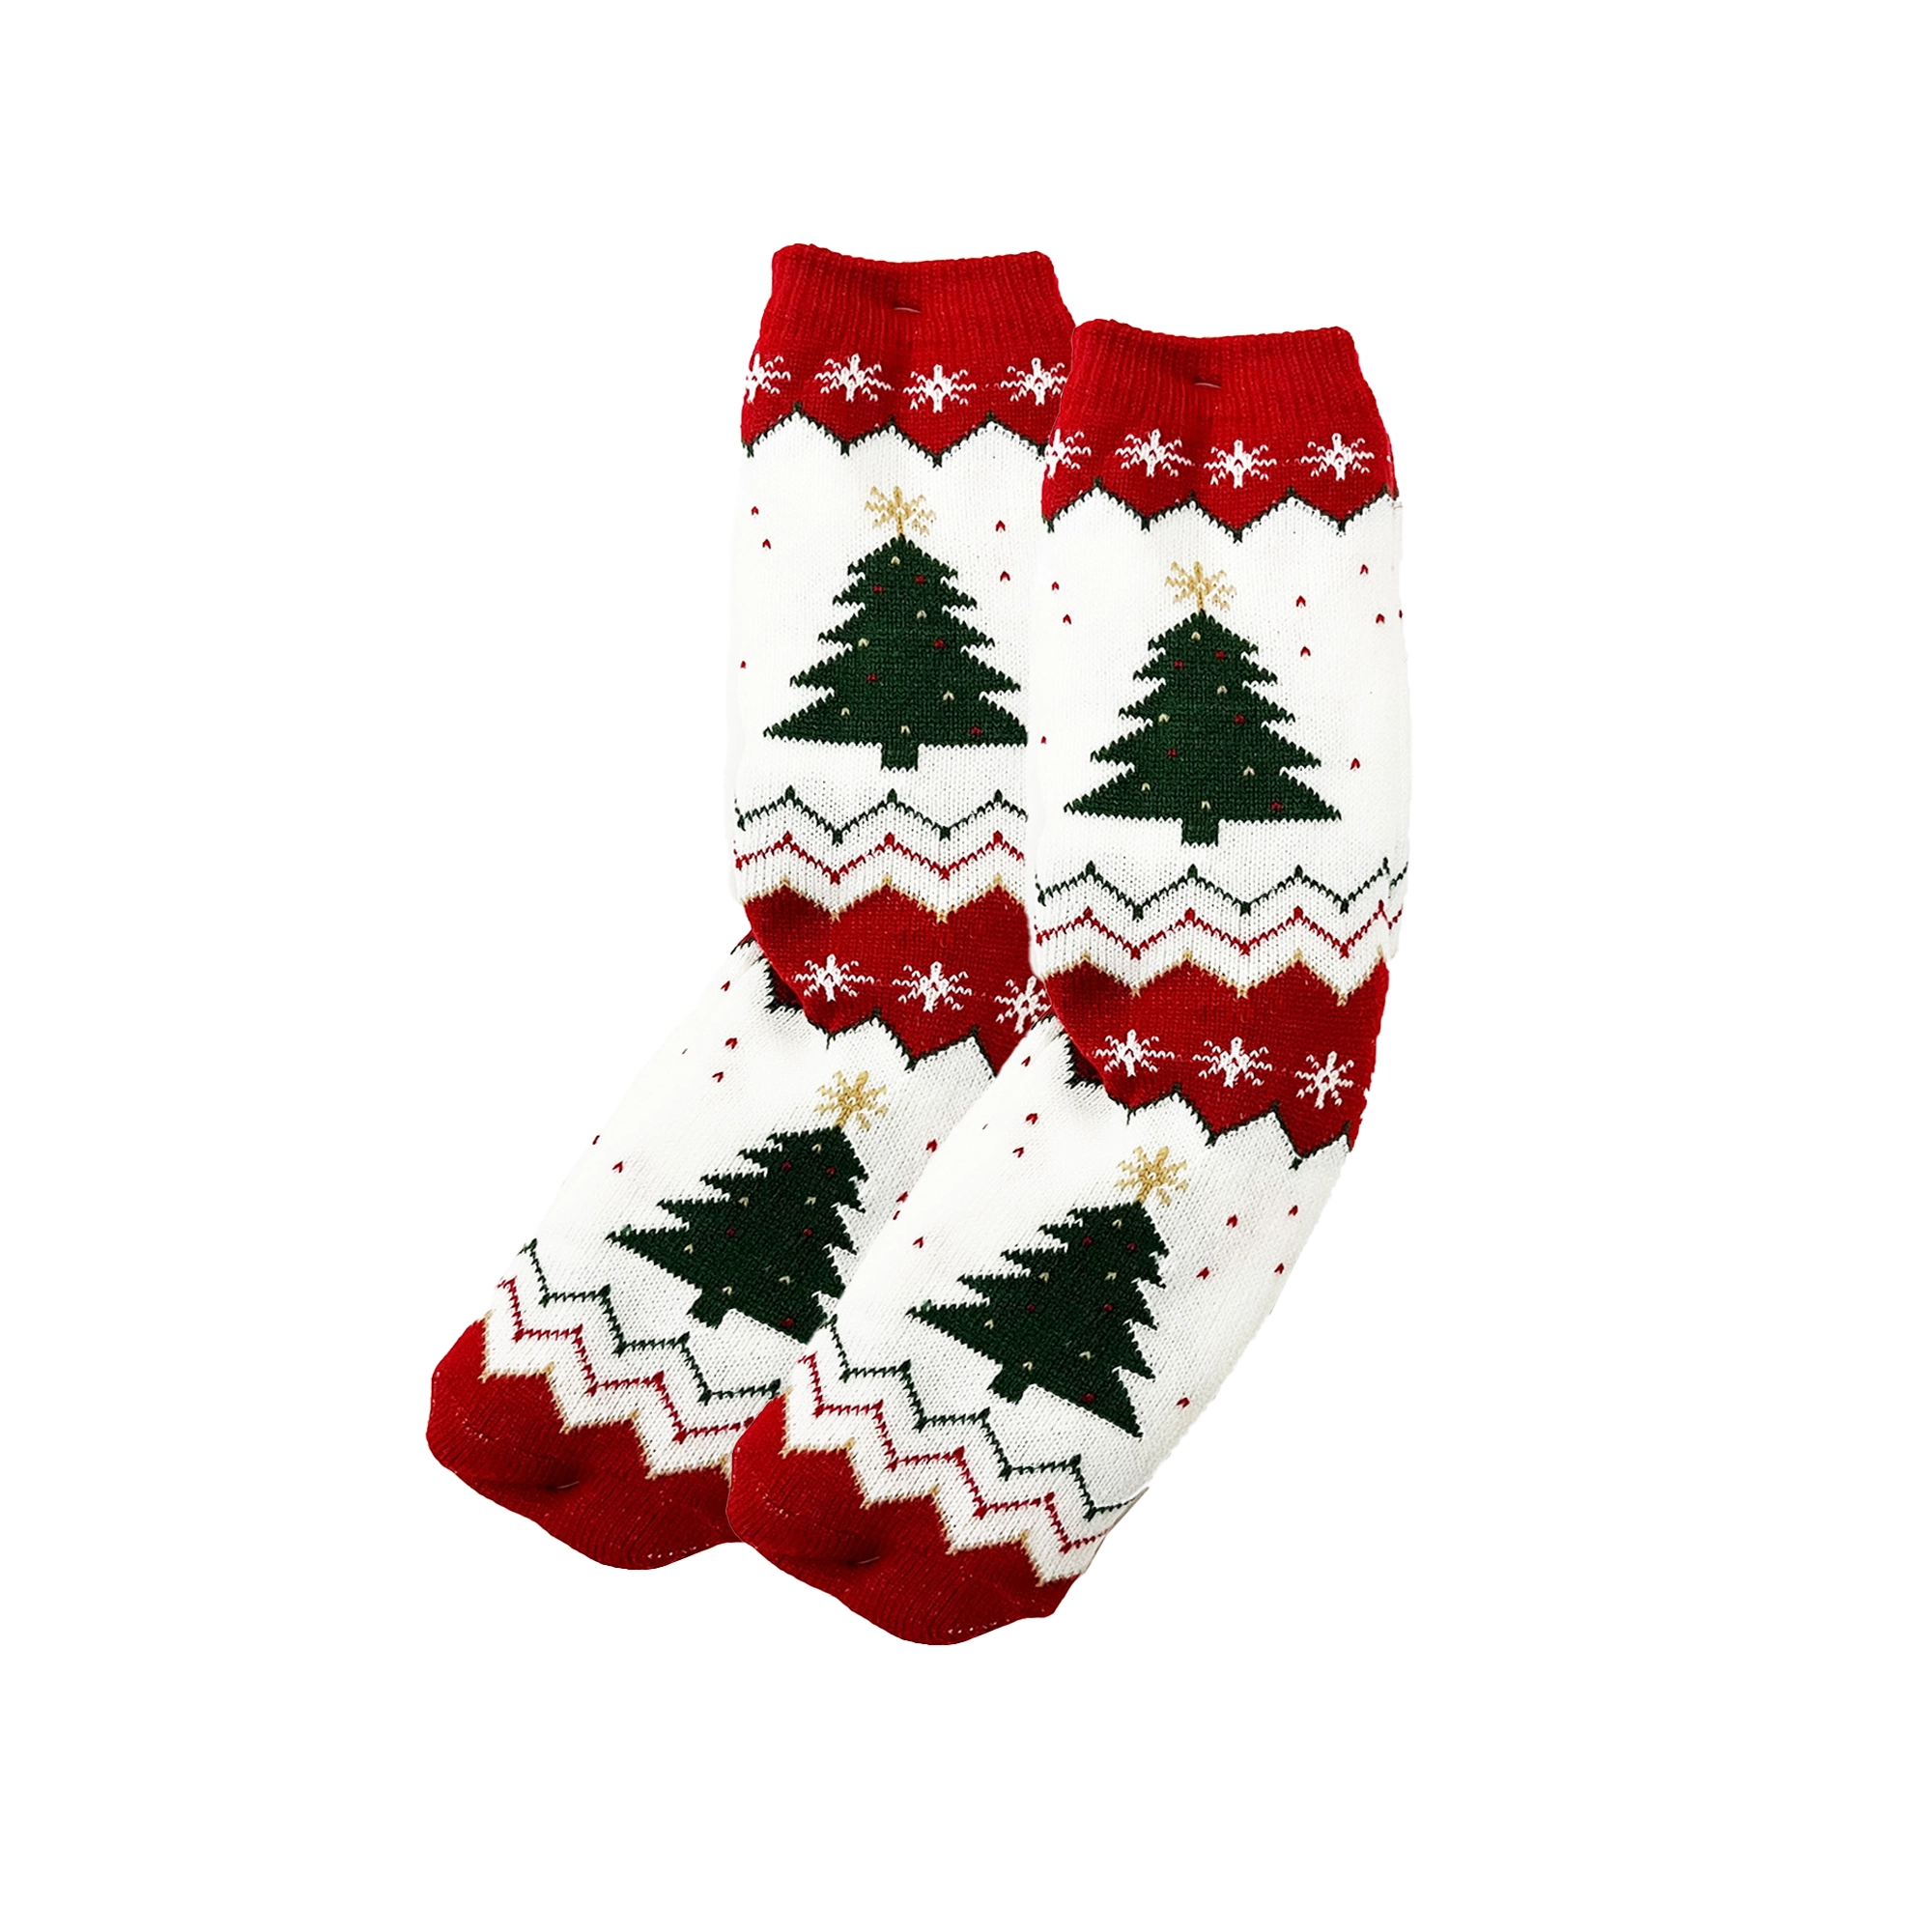 NOELLE - Christmas socks - non-slip - with sherpa lining - one size - Snow White - multicolour